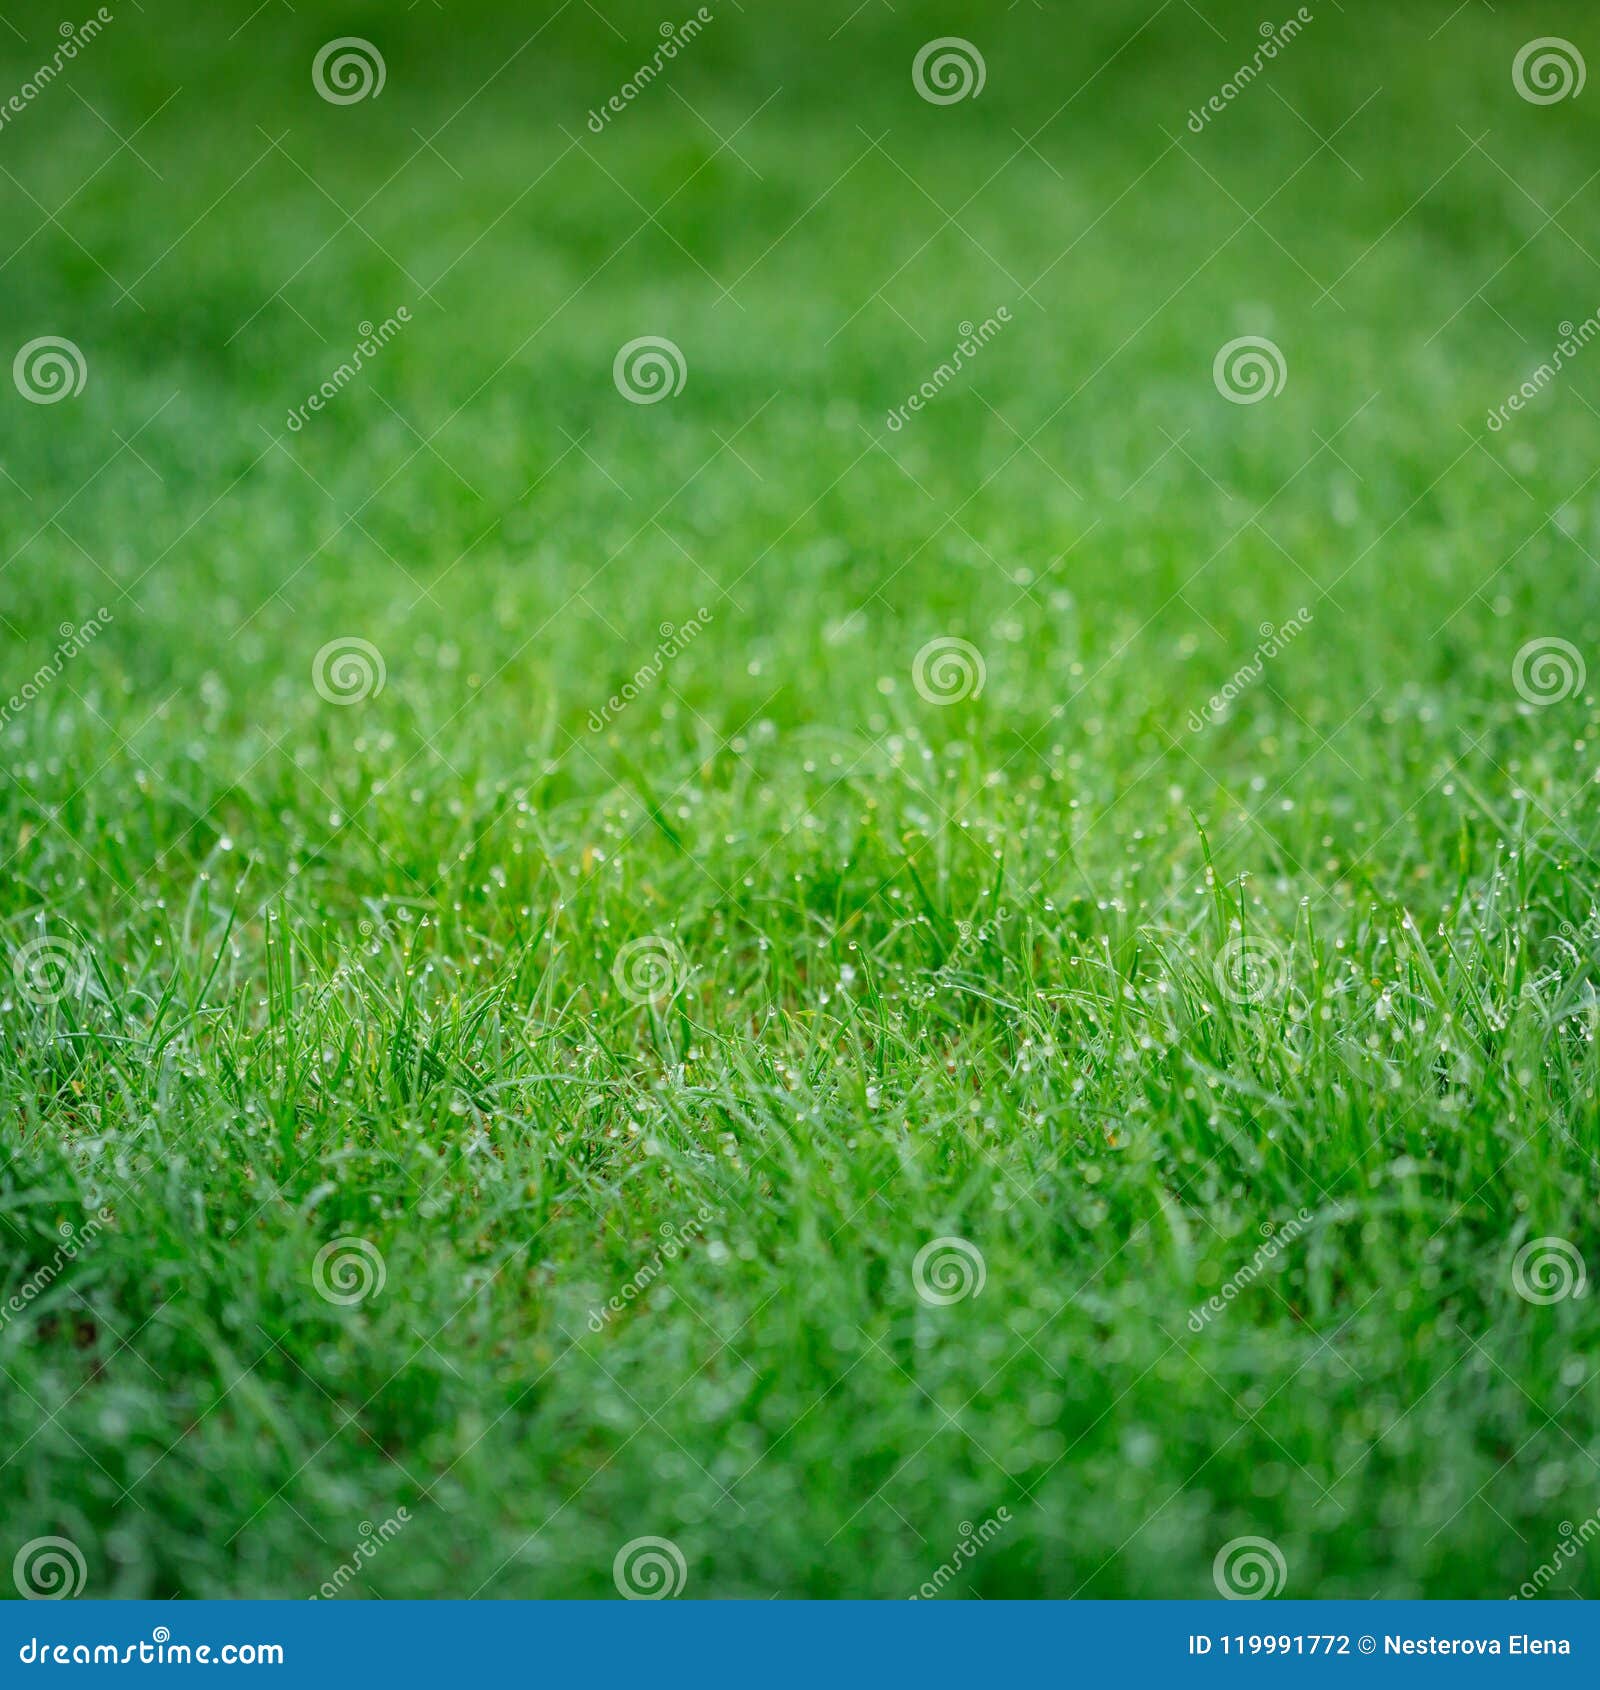 Lush Green Grass Background With Shining Drops Stock Photo - Image of